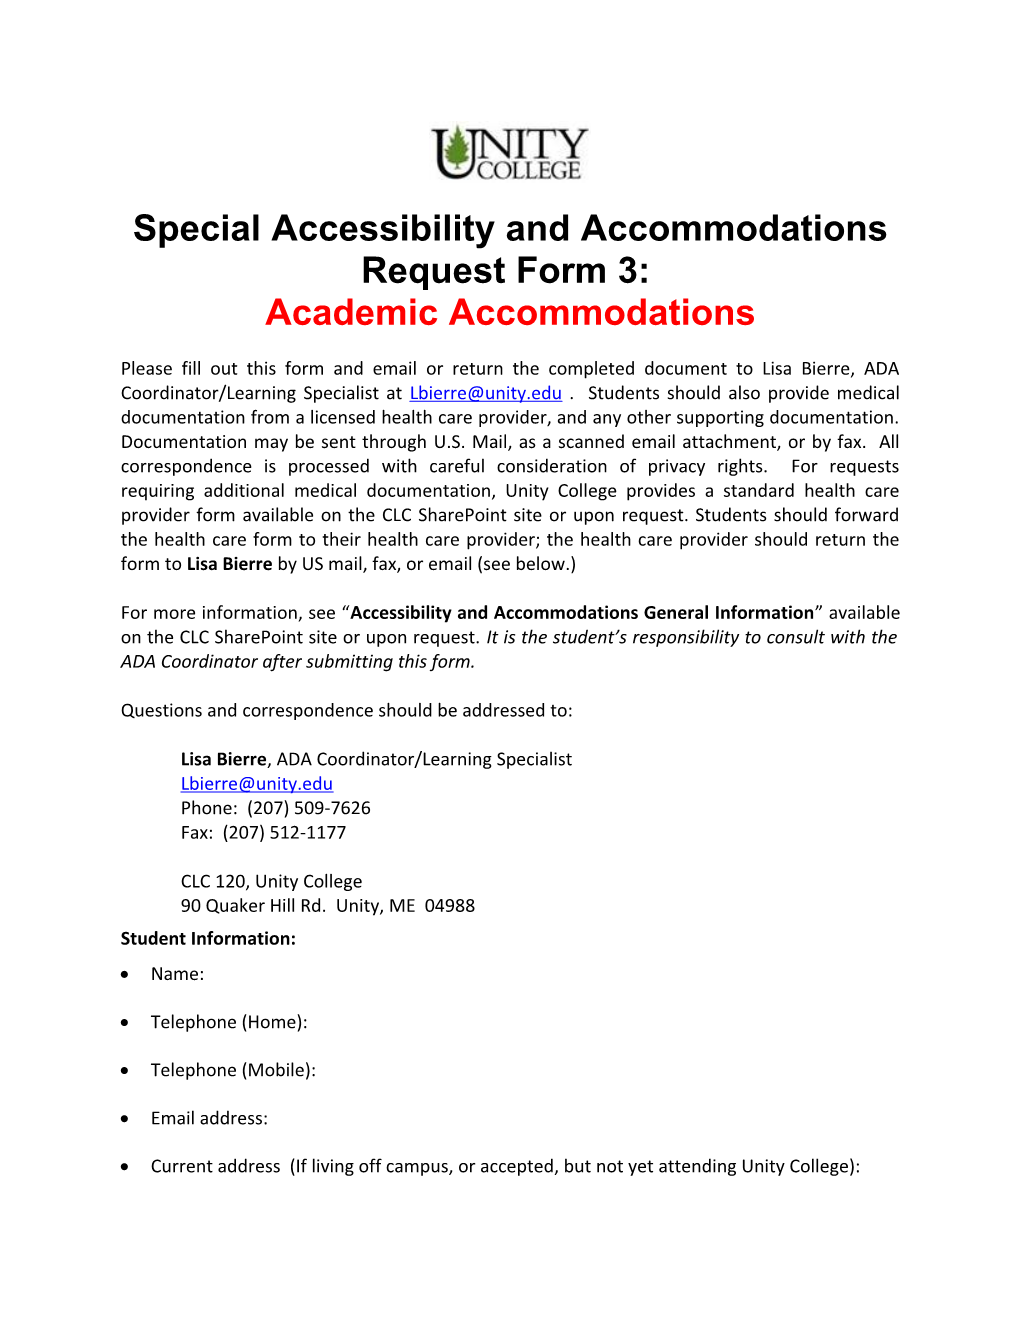 Special Accessibility and Accommodations Request Form 3